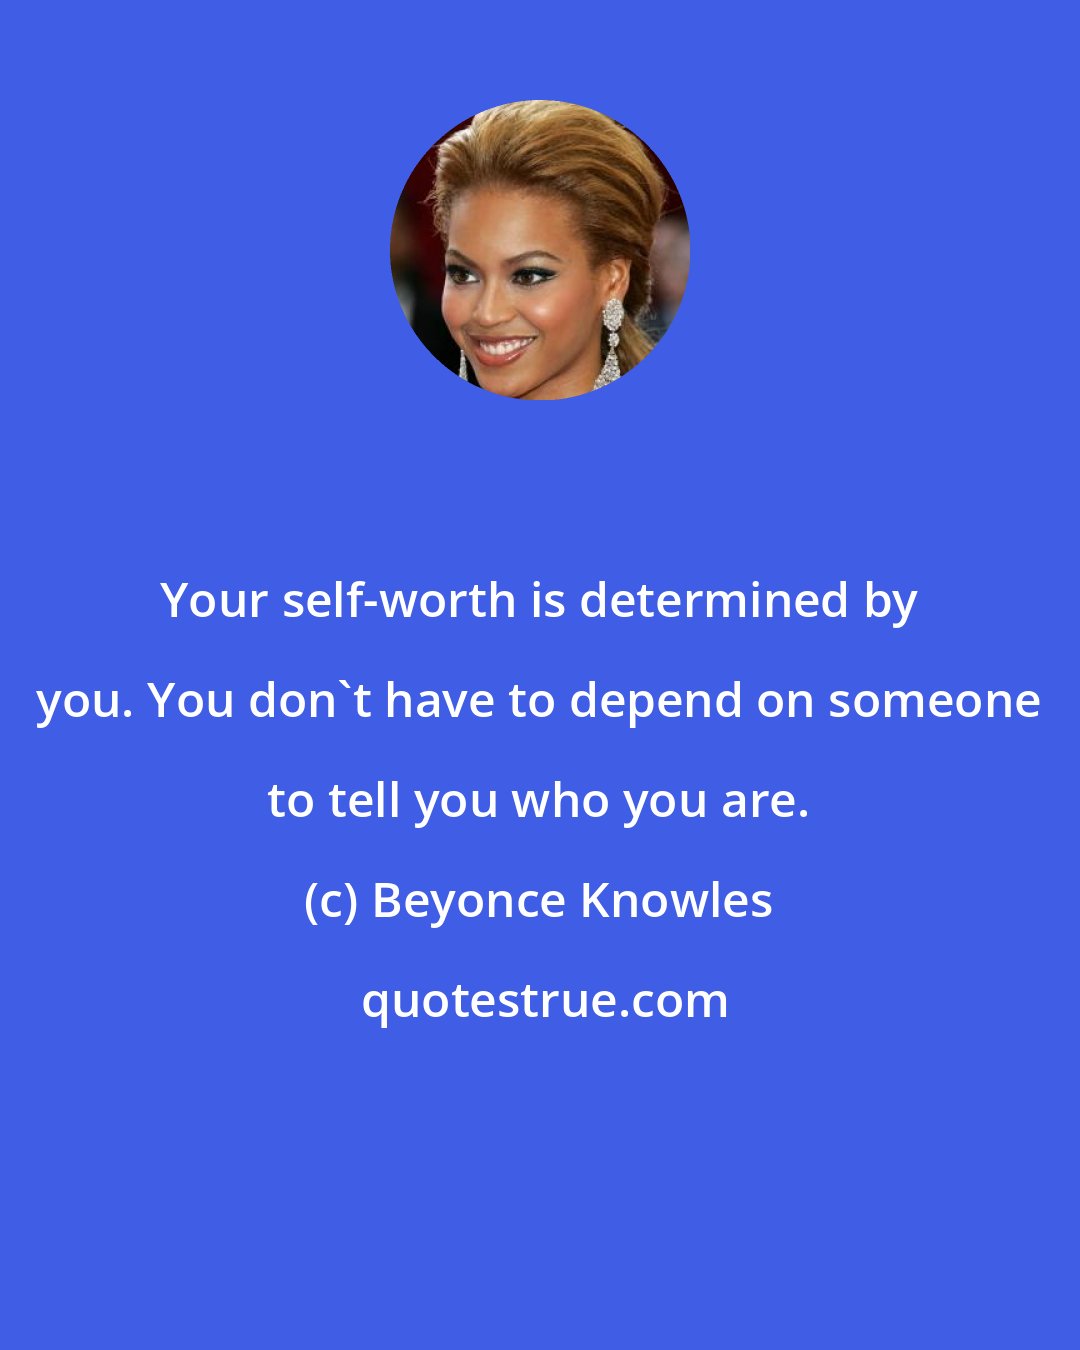 Beyonce Knowles: Your self-worth is determined by you. You don't have to depend on someone to tell you who you are.